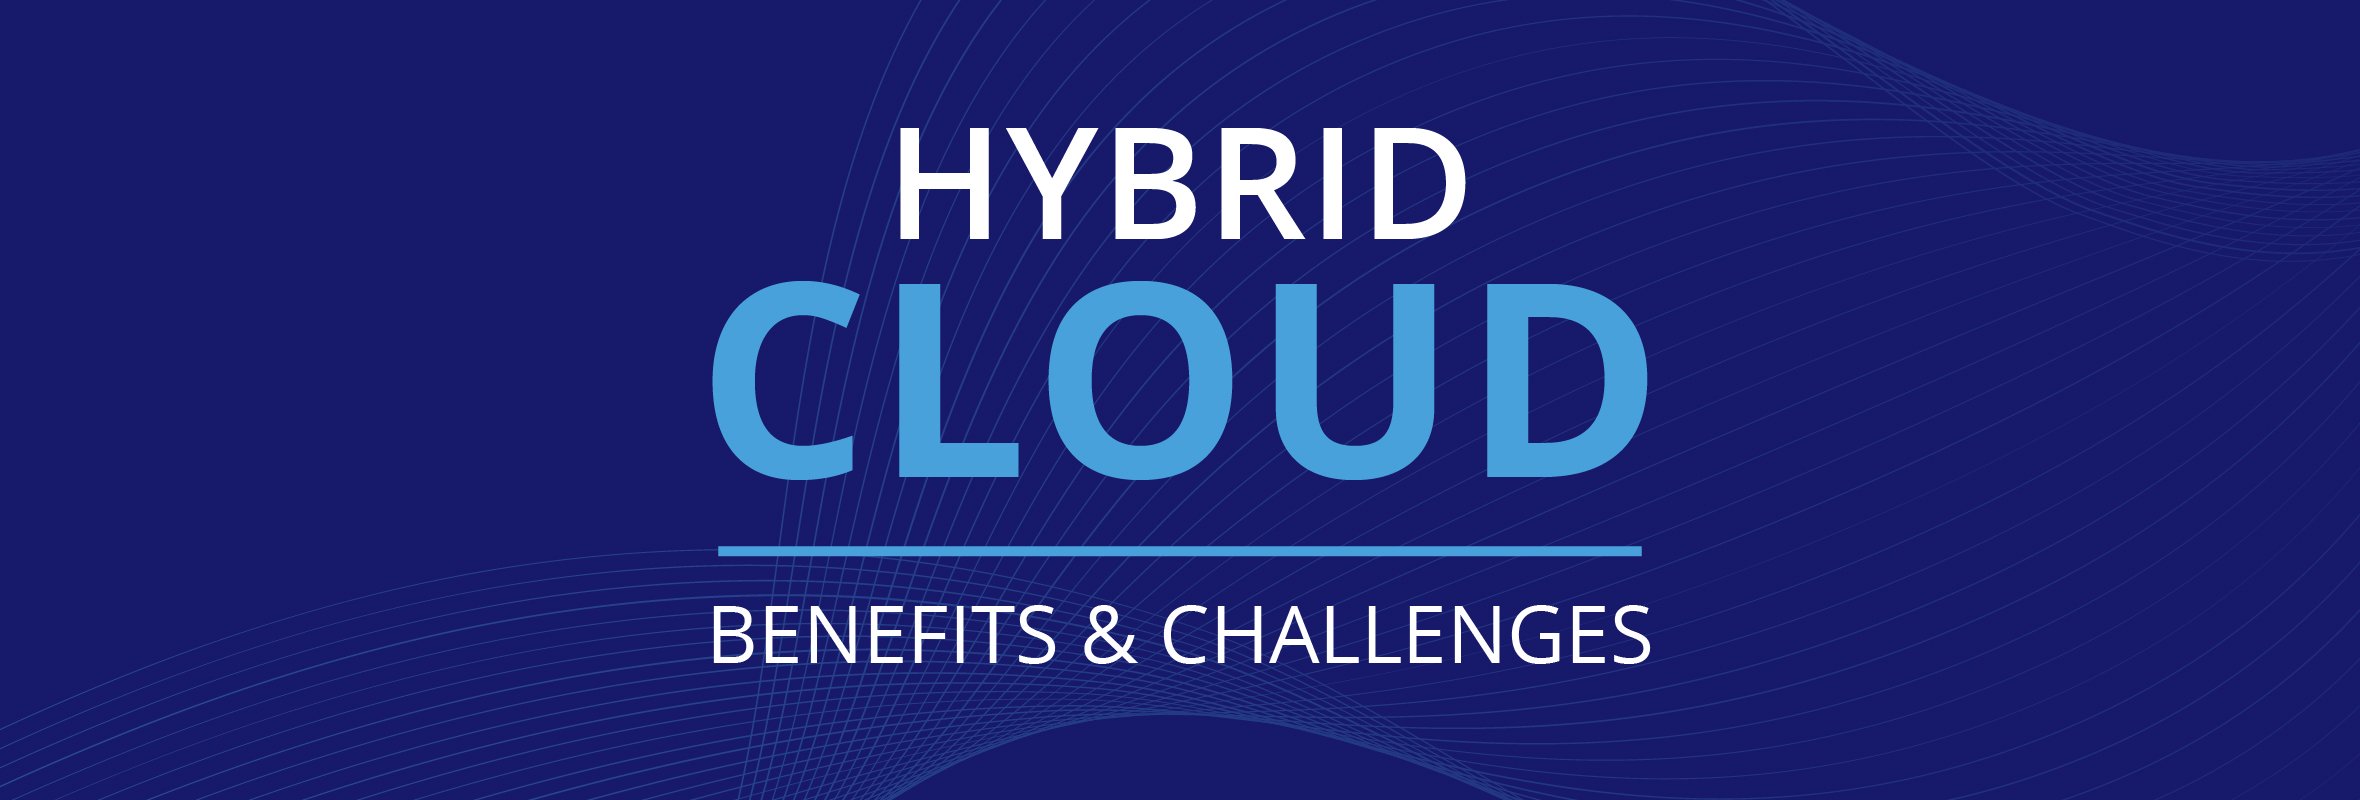 The Top Five Benefits and Challenges of Hybrid Cloud